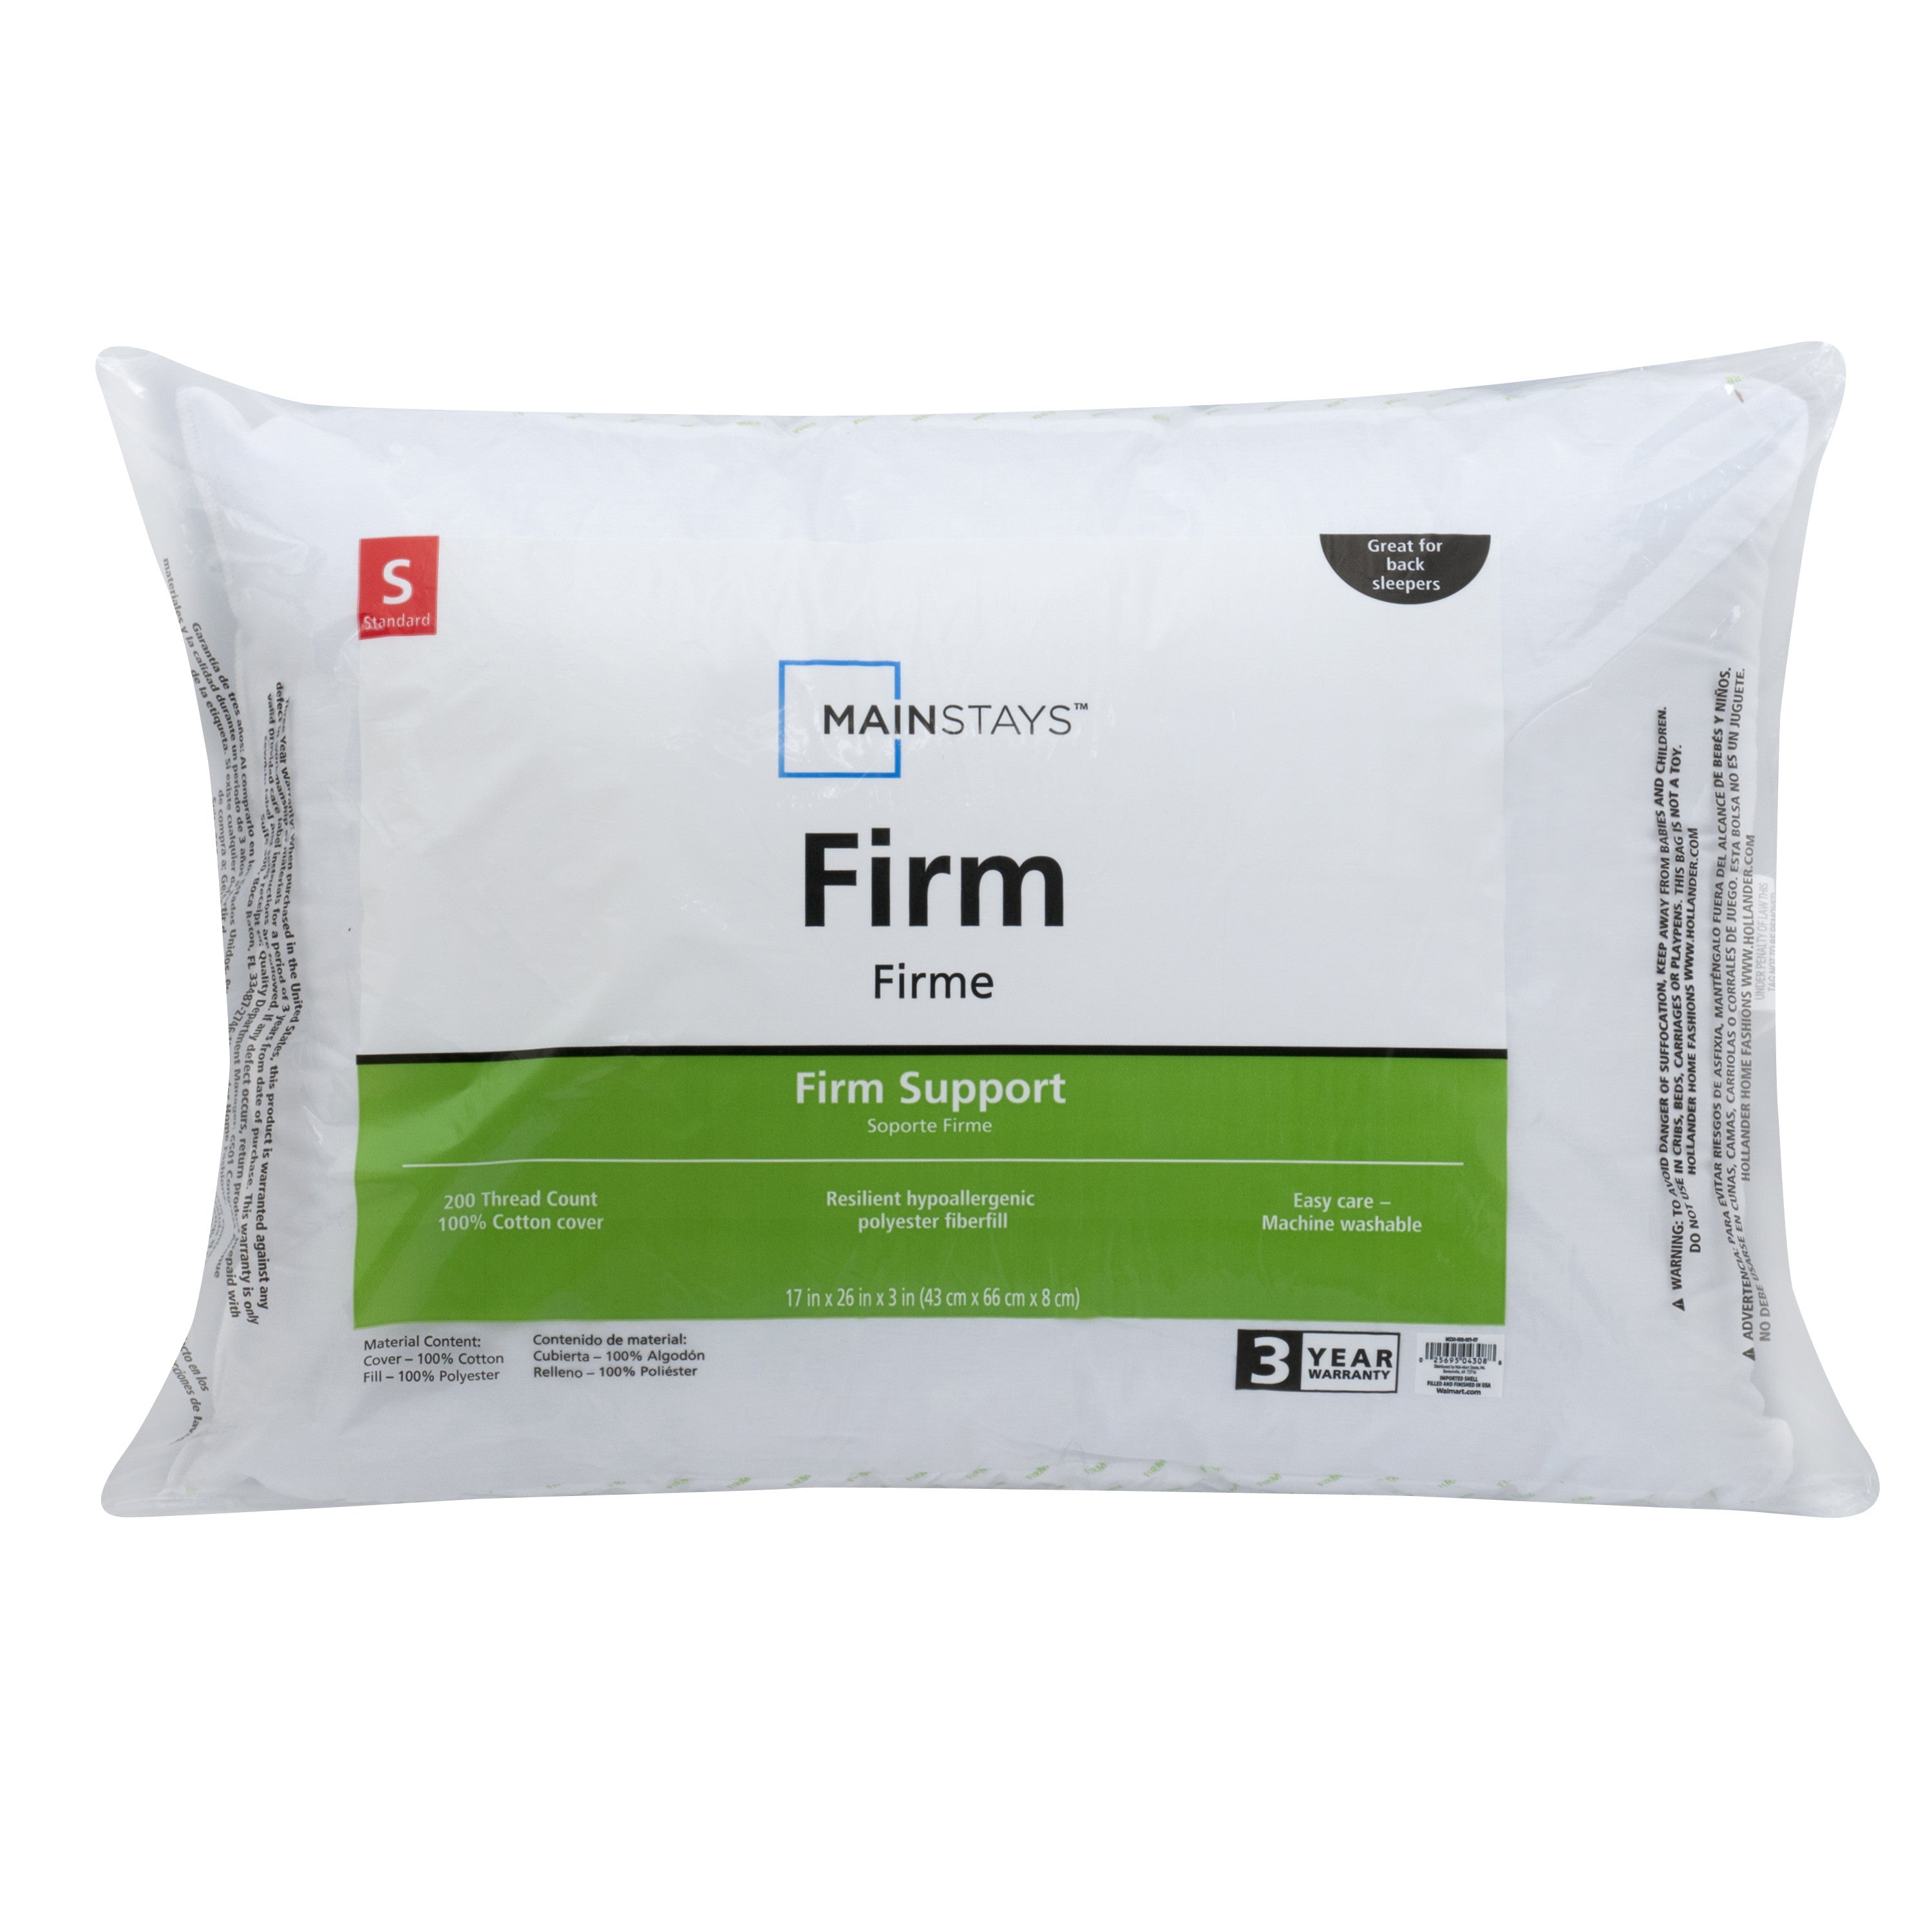 Mainstays Firm Support Pillow, Queen, 200 Thread Count Cotton